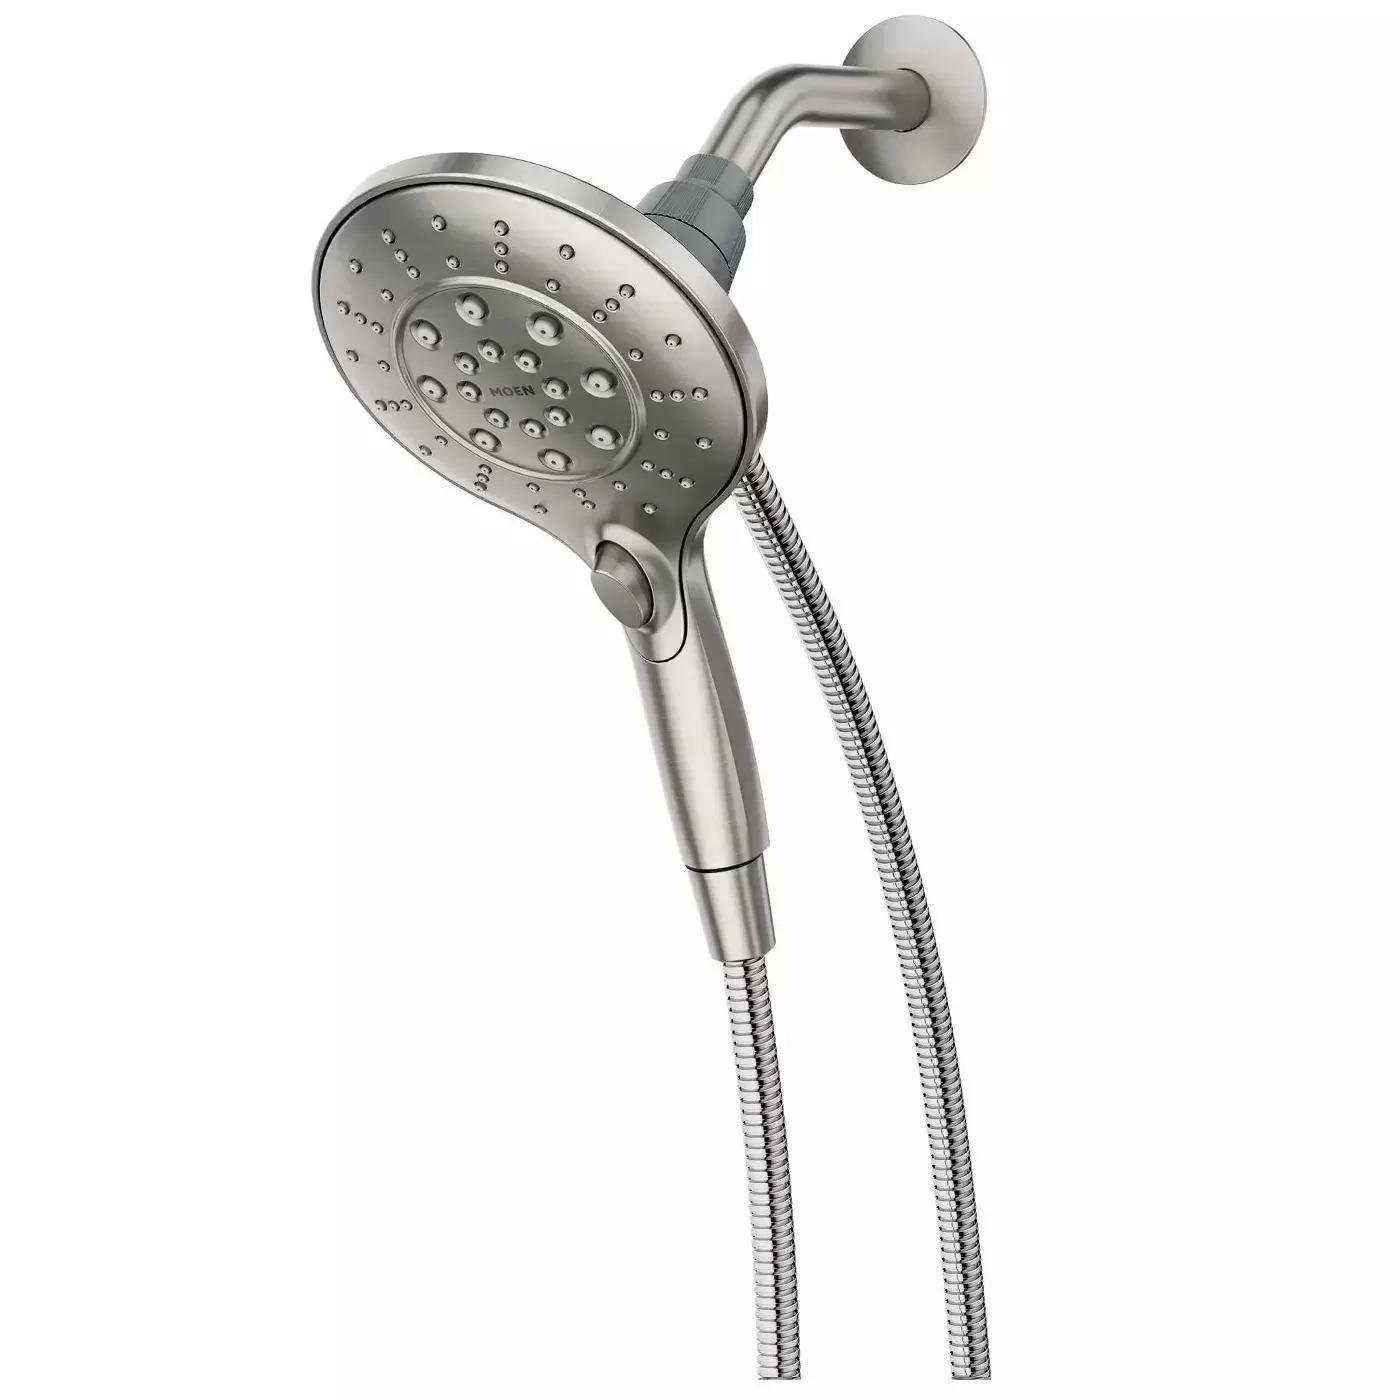 Moen Magnetix Engage 6-Function Push Button Handheld Showerhead for $32.61